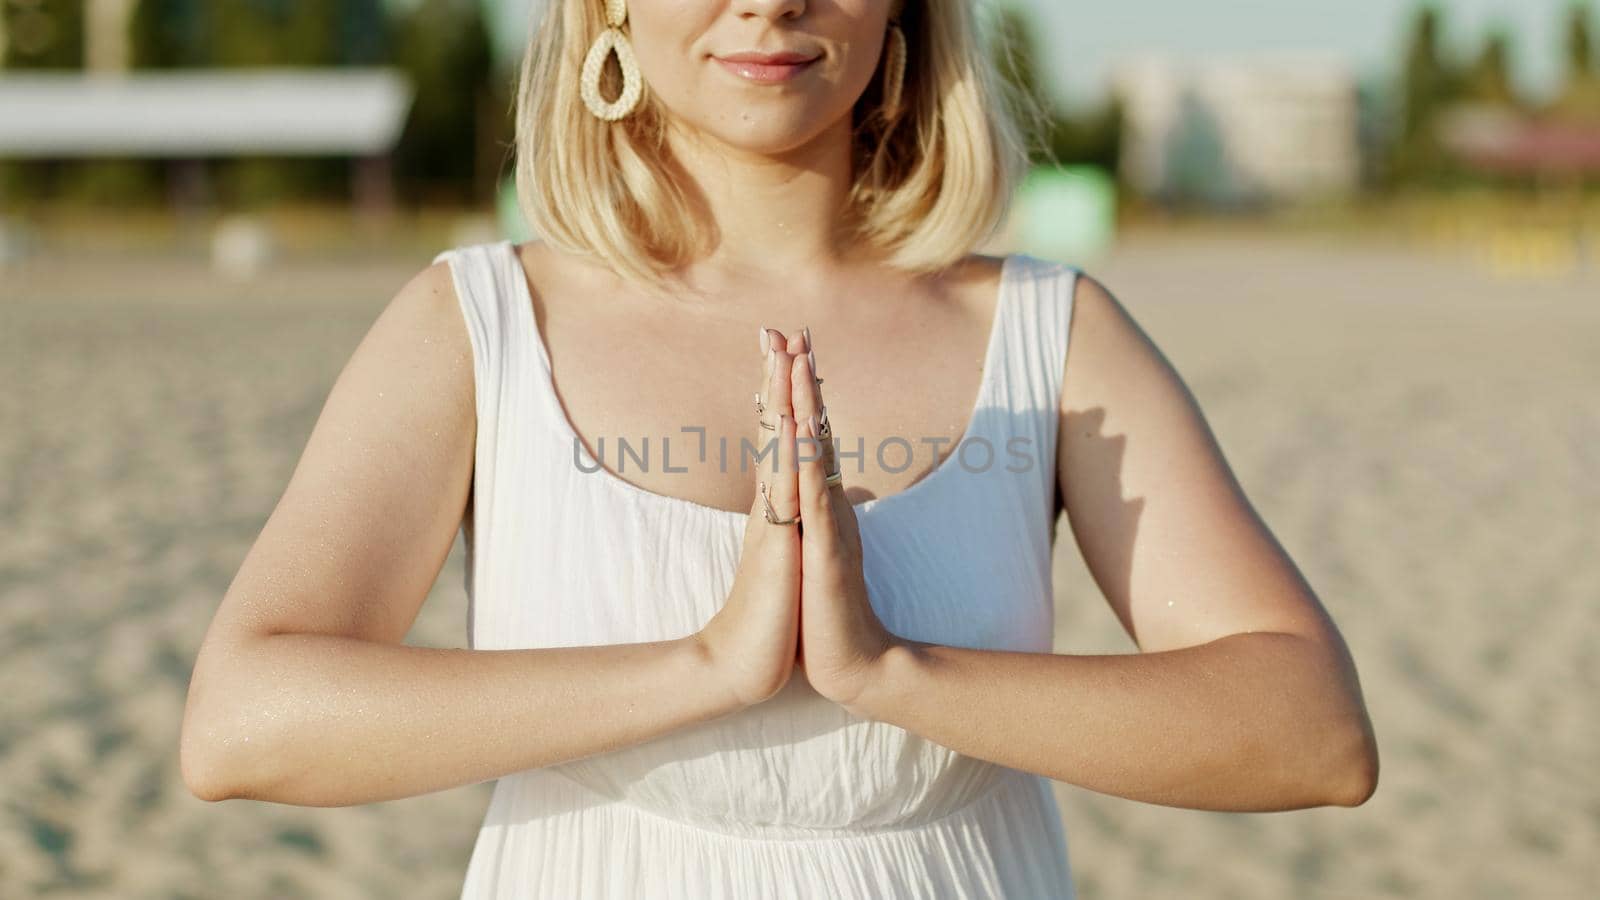 Praying meditating woman, reading mantras, directs thoughts, requests or gratitude to universe. Beach, morning near sea. Spirituality, religion, God concept. High quality photo